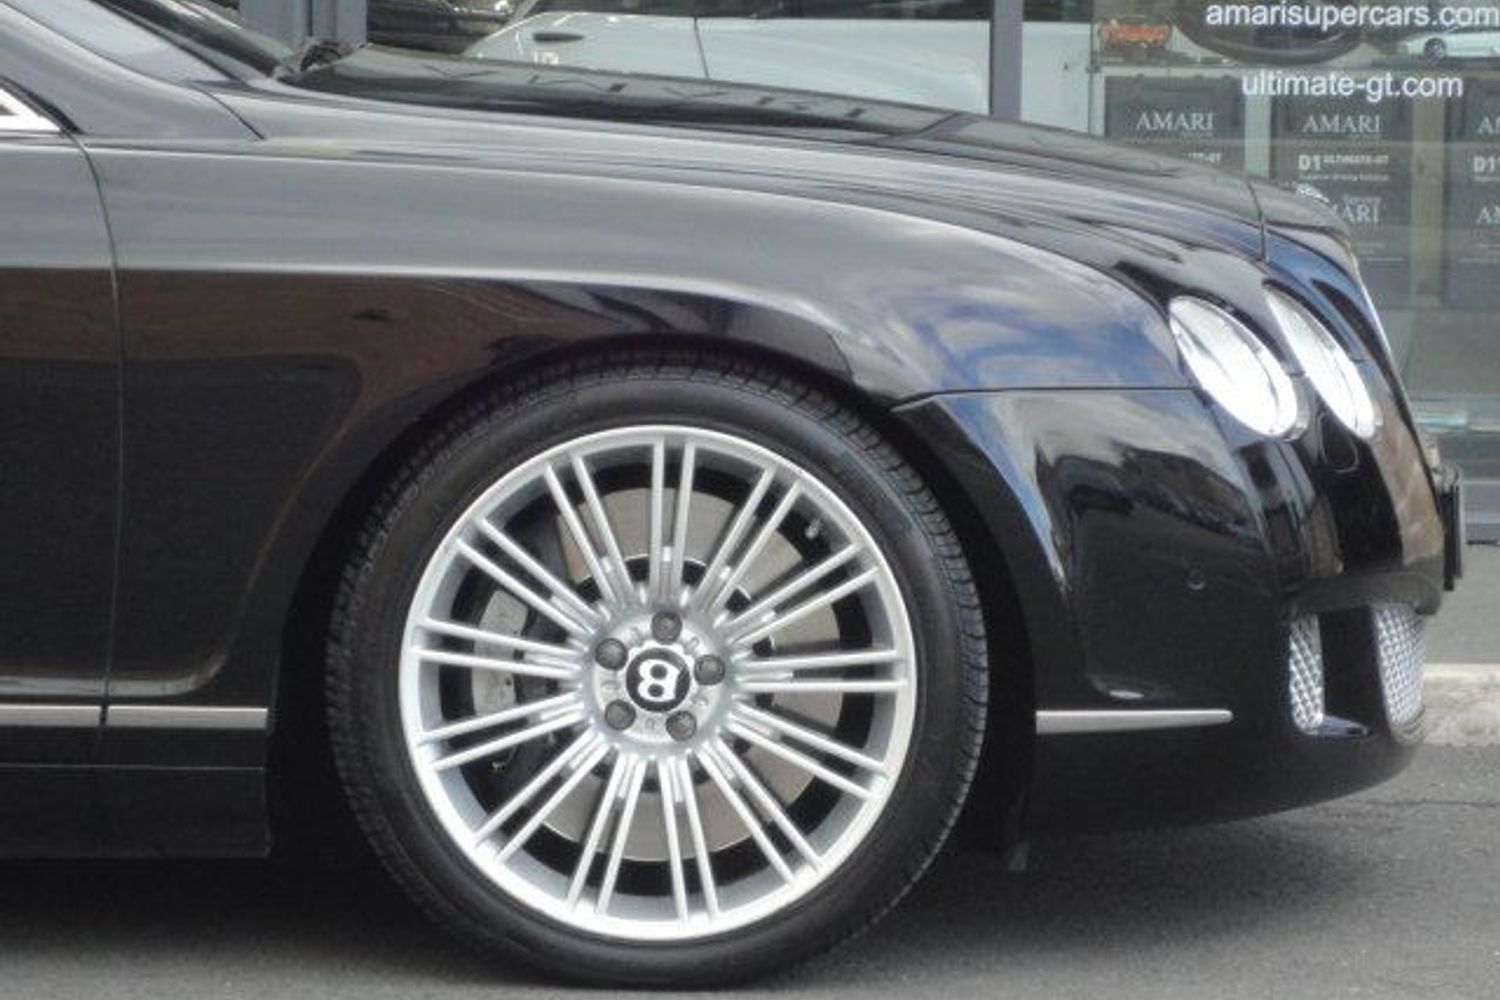 BENTLEY GTC WITH GT SPEED COSMETIC COVERSTION